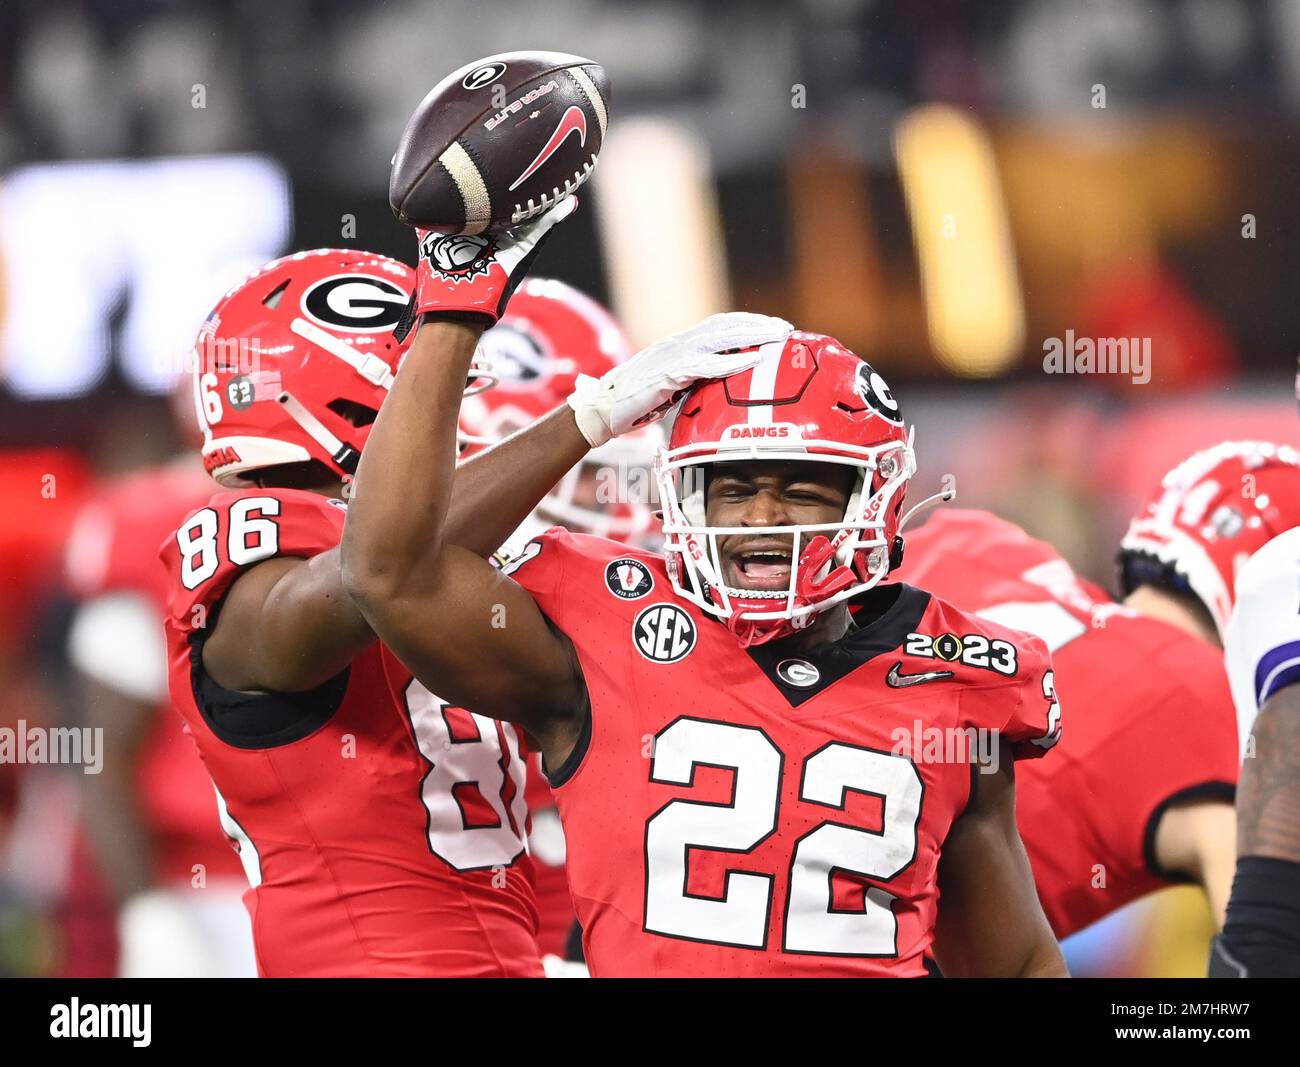 Inglewood, United States. 09th Jan, 2023. Branson Robinson of the Georgia Bulldogs celebrates in the second half against the TCU Horned Frogs at the CFP National Championship game at SoFi Stadium in Inglewood, California, on Monday, January 9, 2023. Georgia defeated TCU 65-7. Photo by Mike Goulding/UPI Credit: UPI/Alamy Live News Stock Photo